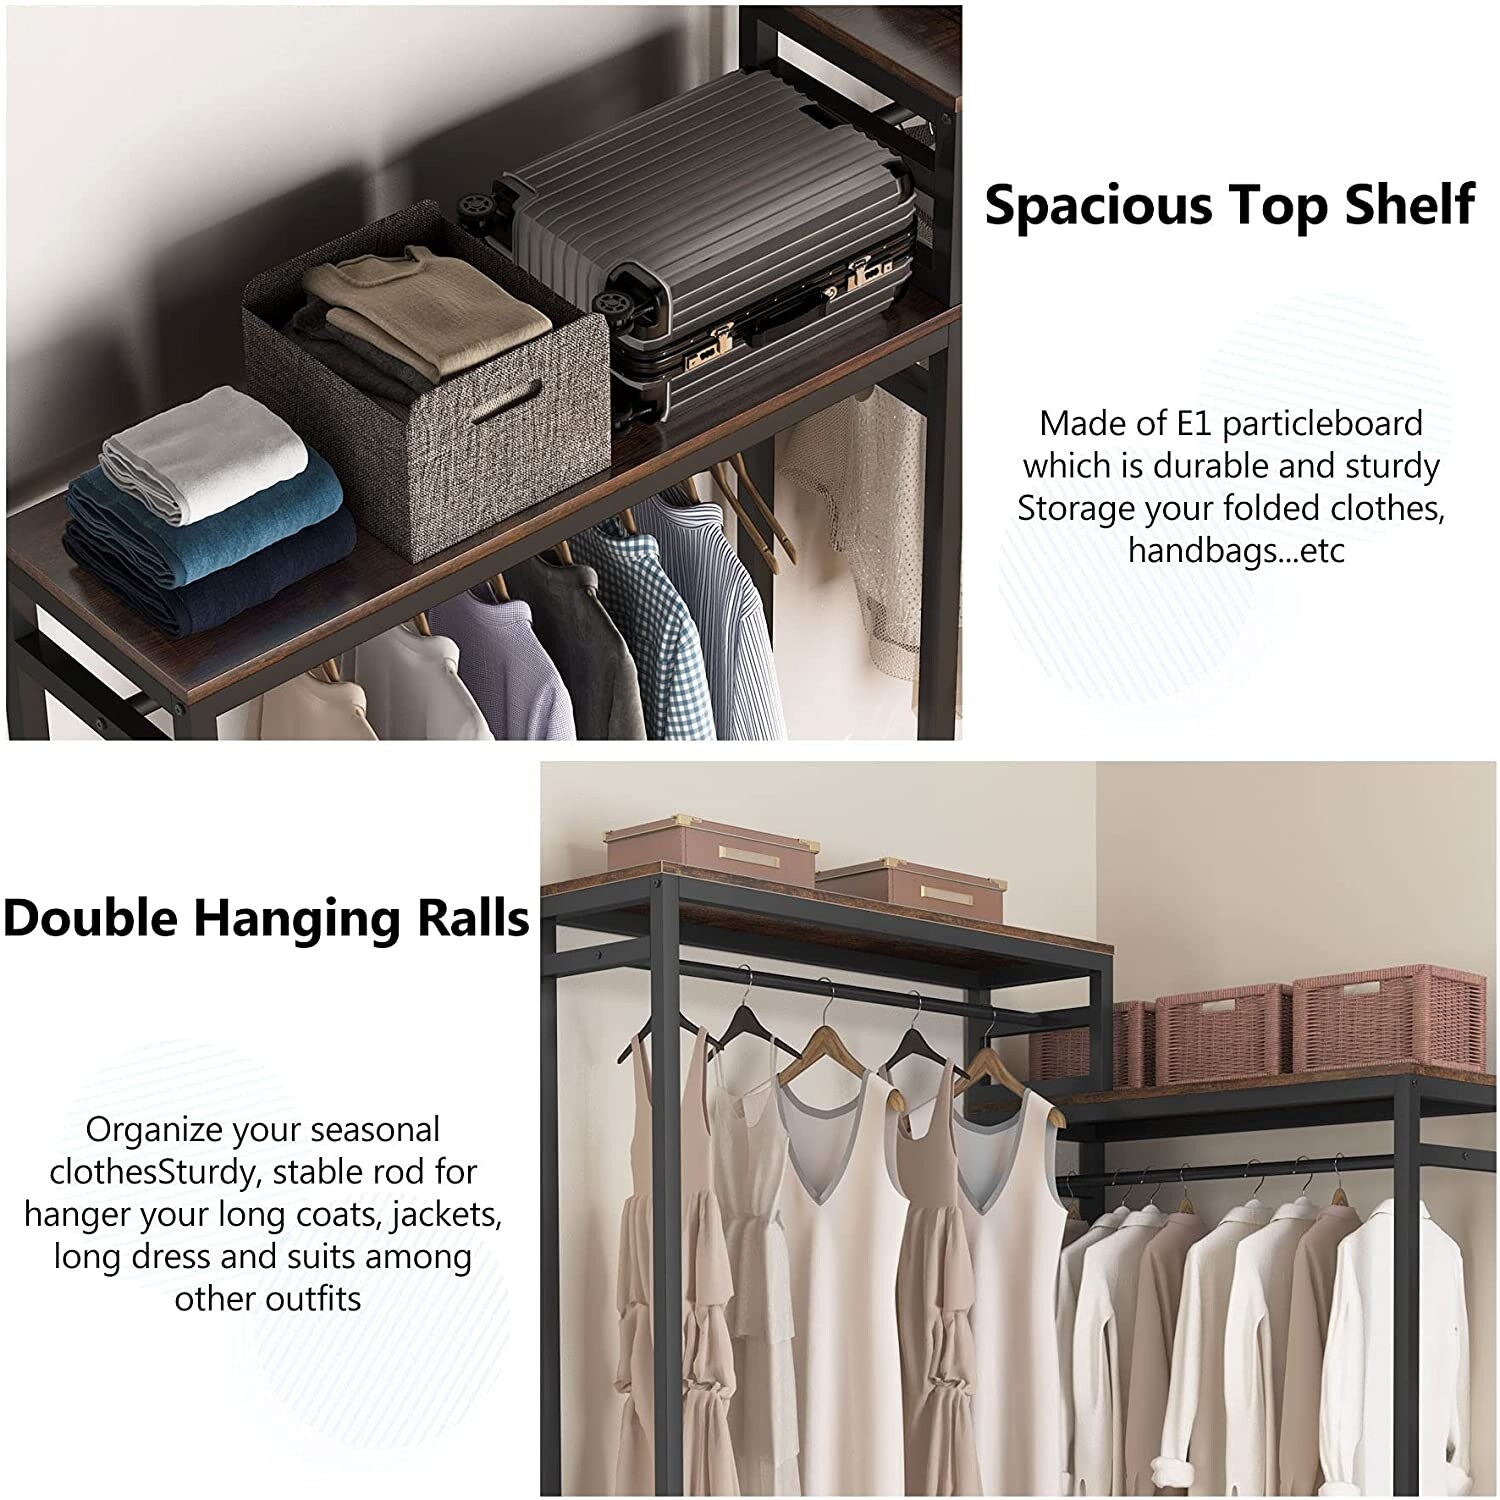 https://ak1.ostkcdn.com/images/products/is/images/direct/9c75c36d31dc8b40e5a665b89f0d7fec5b2cc9c6/Heavy-Duty-Metal-Clothes-Garment-Racks-with-Storage-Shelves-and-Double-Hanging-Rod%2CFree-Standing-Closet-Organizer.jpg